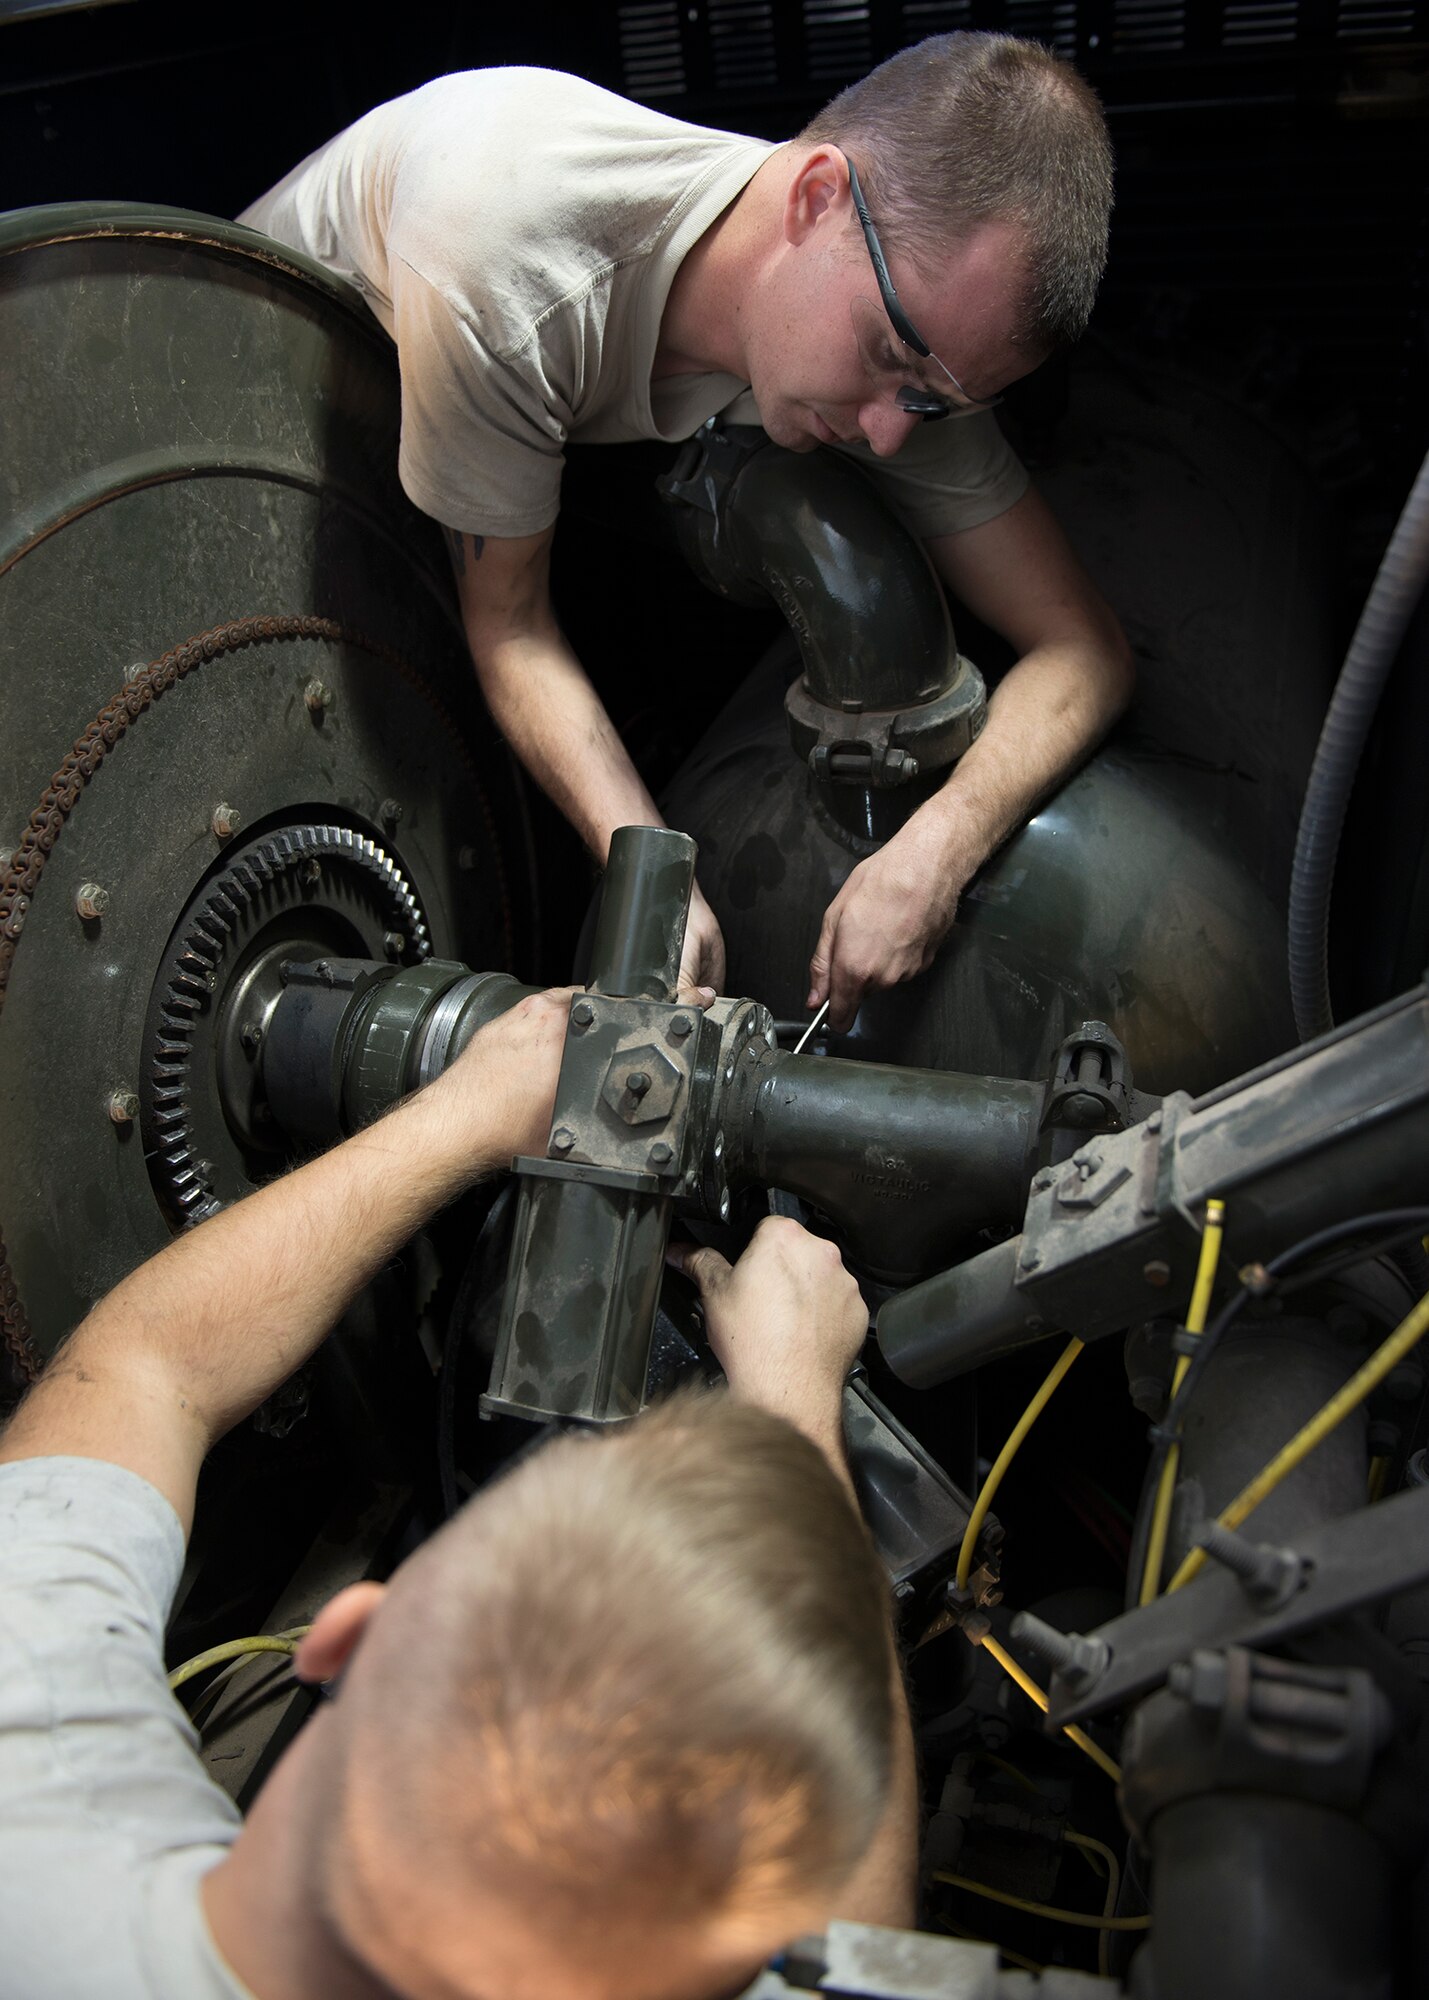 Senior Airman Tyler Lee Bordner and Senior Airman Johnathan Bailey, 49th Logistics Readiness Squadron mission generating vehicle and equipment maintenance journeymen, separate the gasket on a butterfly valve at Holloman Air Force Base, N.M., Dec. 4, 2017. The shop is constantly working, whether it’s: replacing broken parts on a vehicle, diagnosing vehicle problems or general vehicle upkeep in support of Holloman’s mission. (U.S. Air Force photo by Staff Sgt. Timothy M. Young)